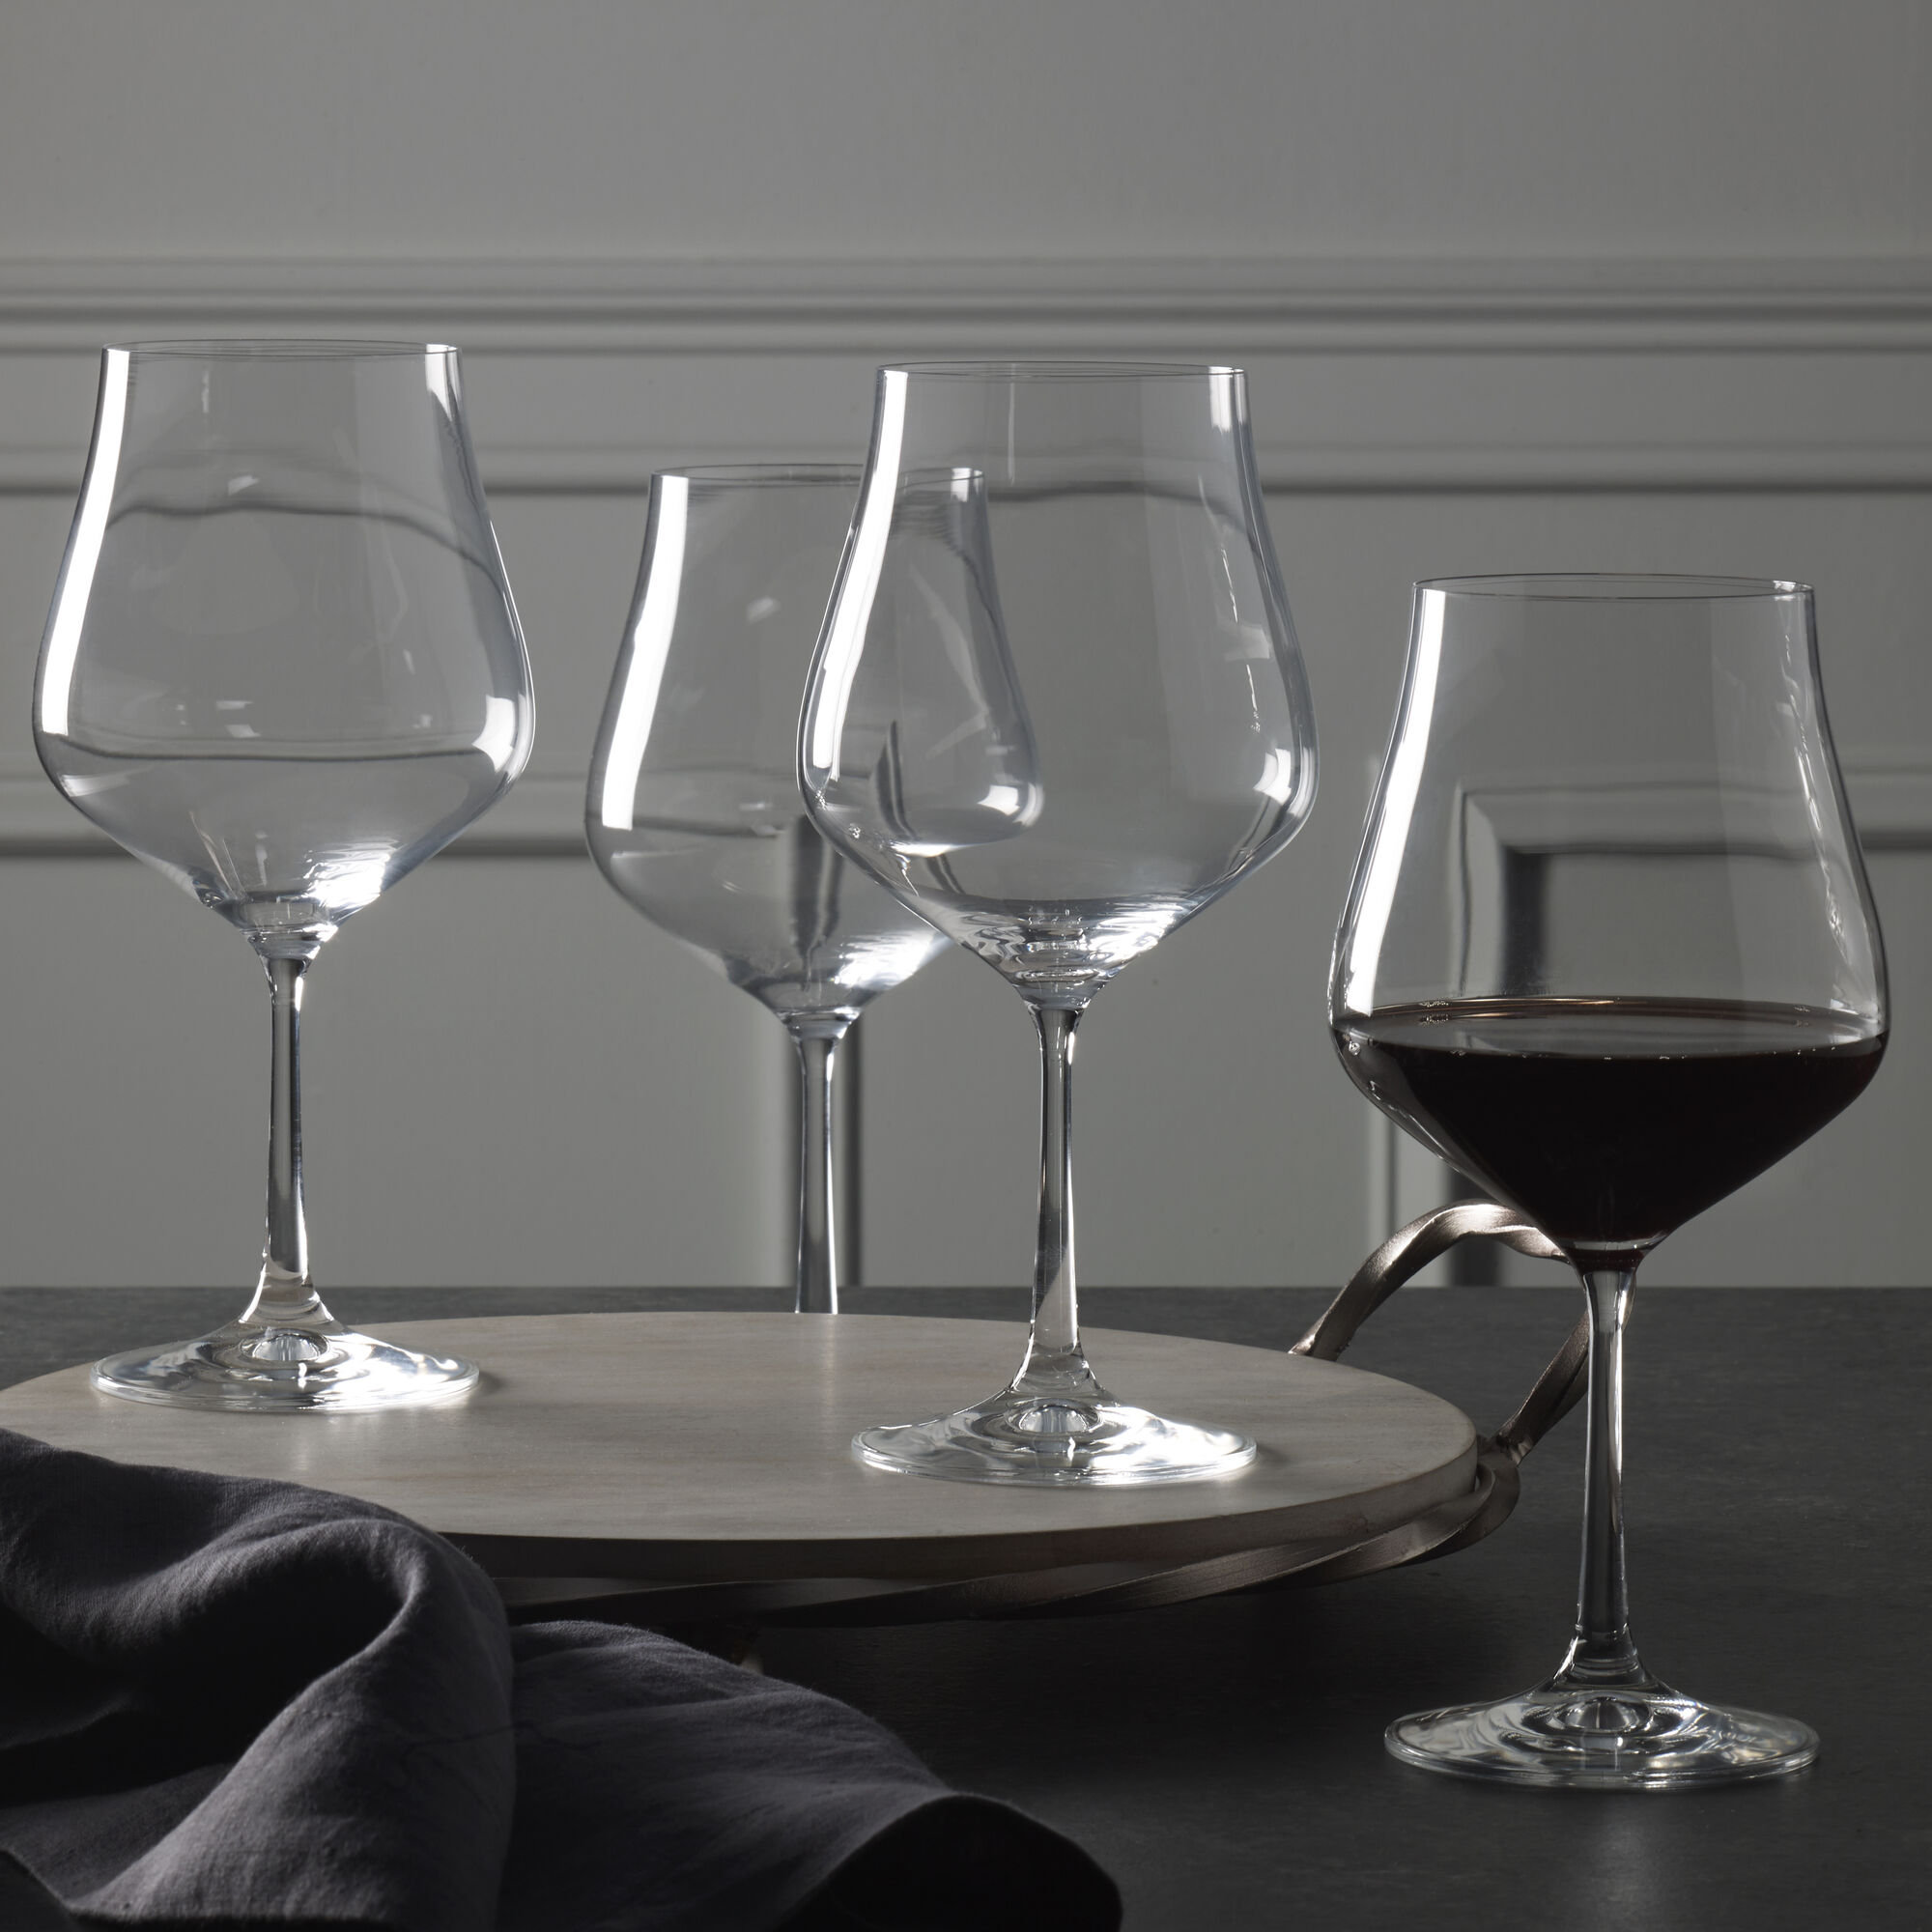 Mikasa Grace Set Of 4 Red Wine Glasses, 22-Ounce, Clear